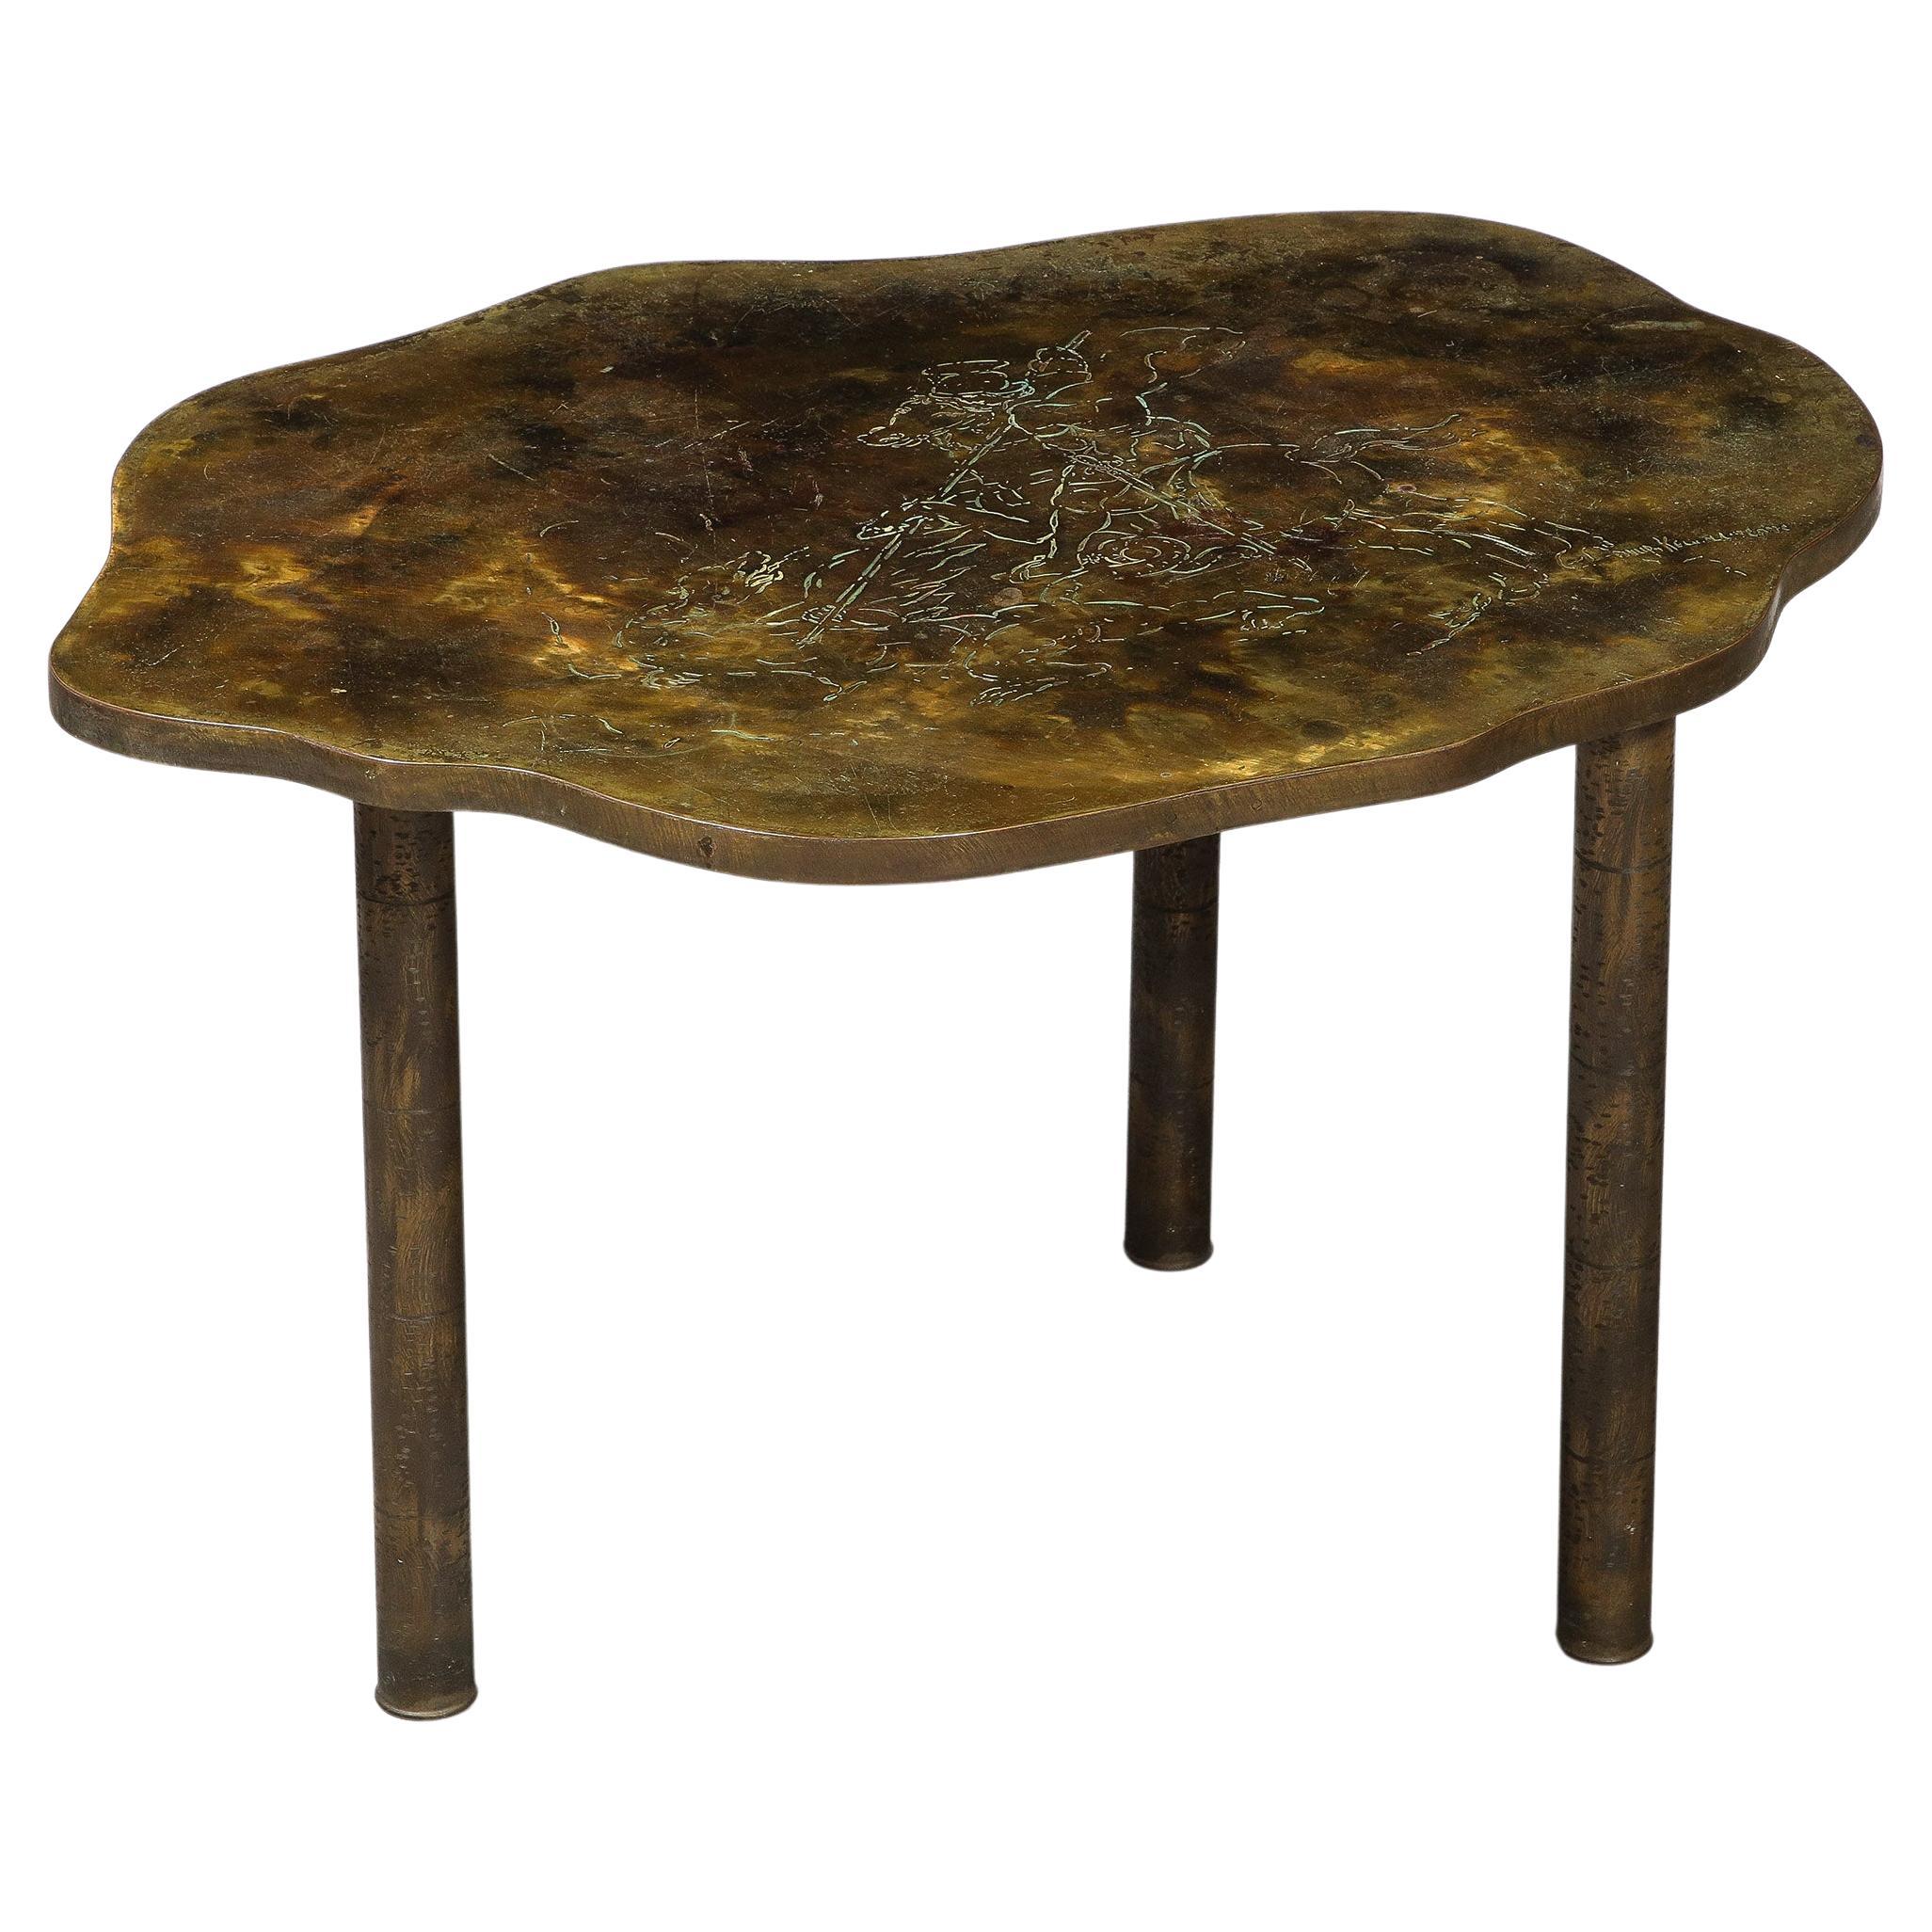 "Turtle Table" by Philip and Kelvin LaVerne